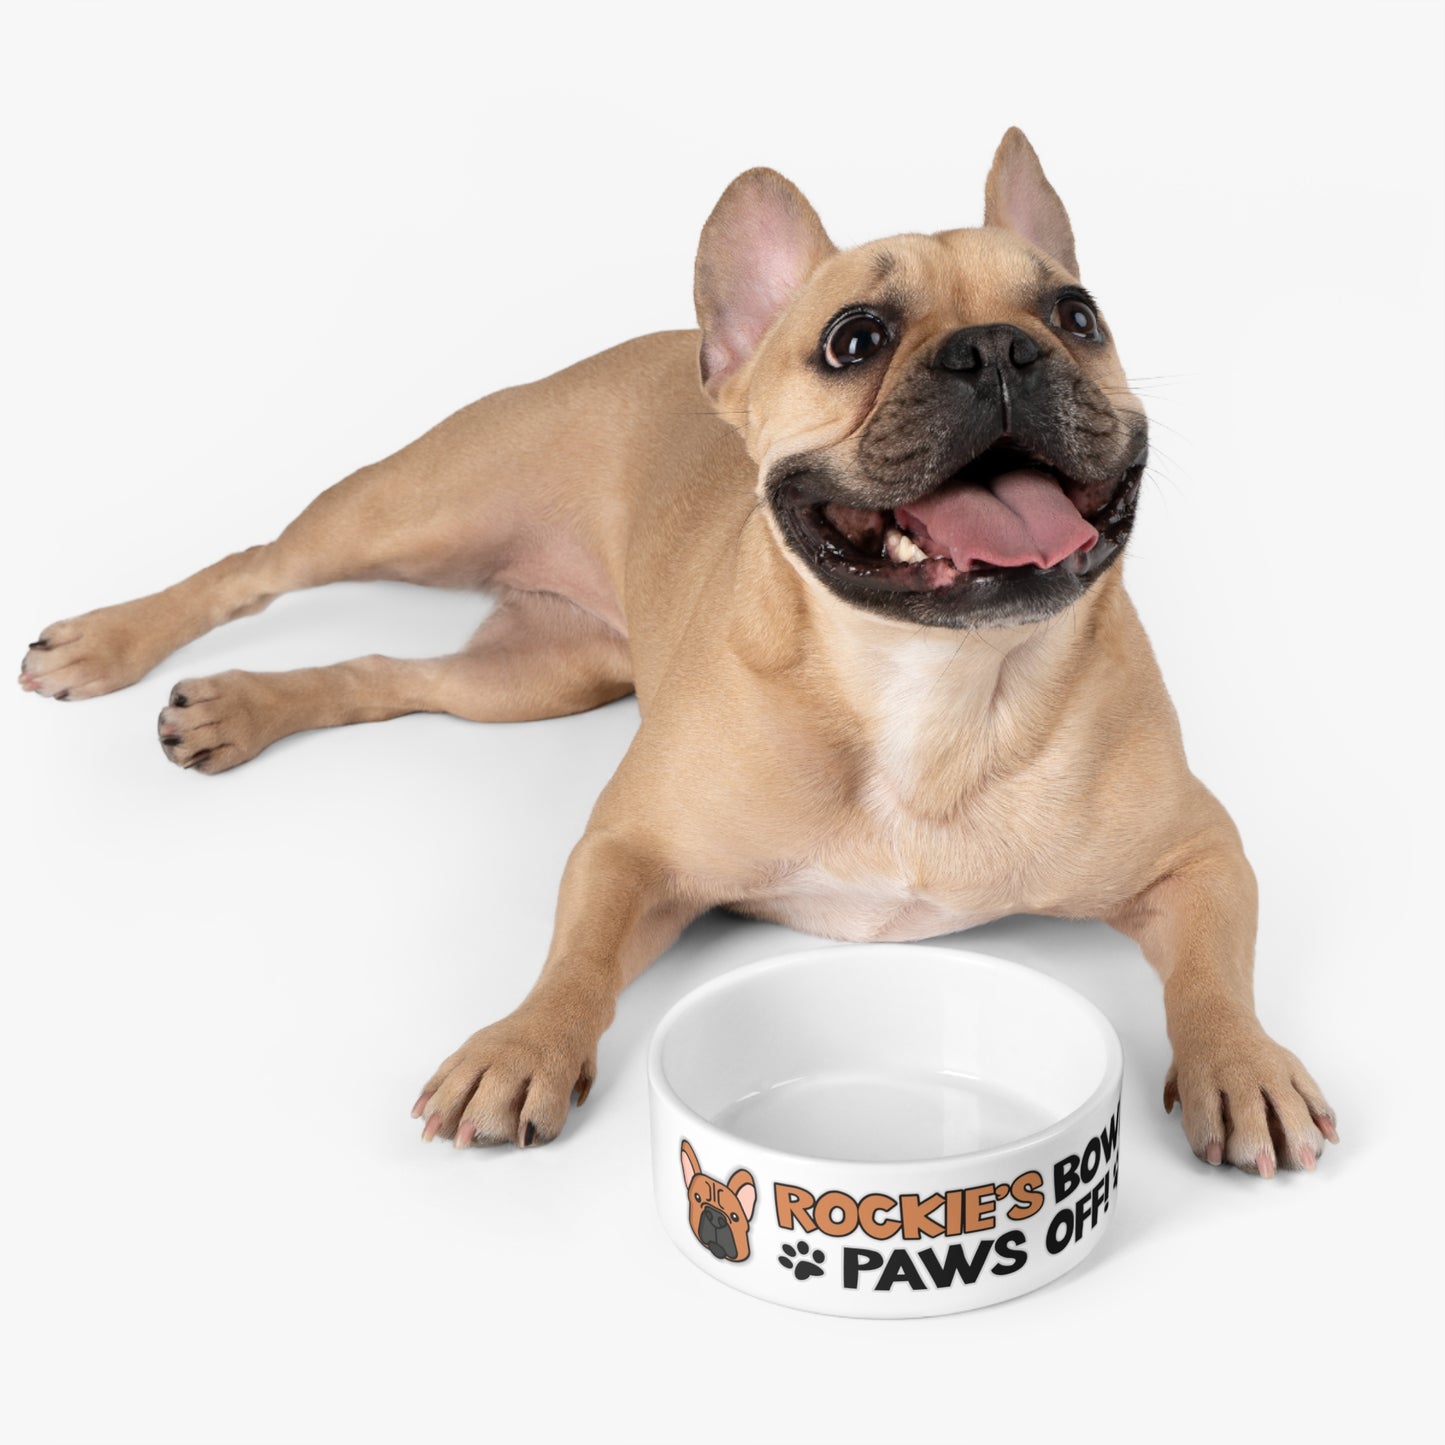 A cute french bulldog next to a personalized Dog Bowl with the phrase: "Rockie's Bowl Paws Off!"